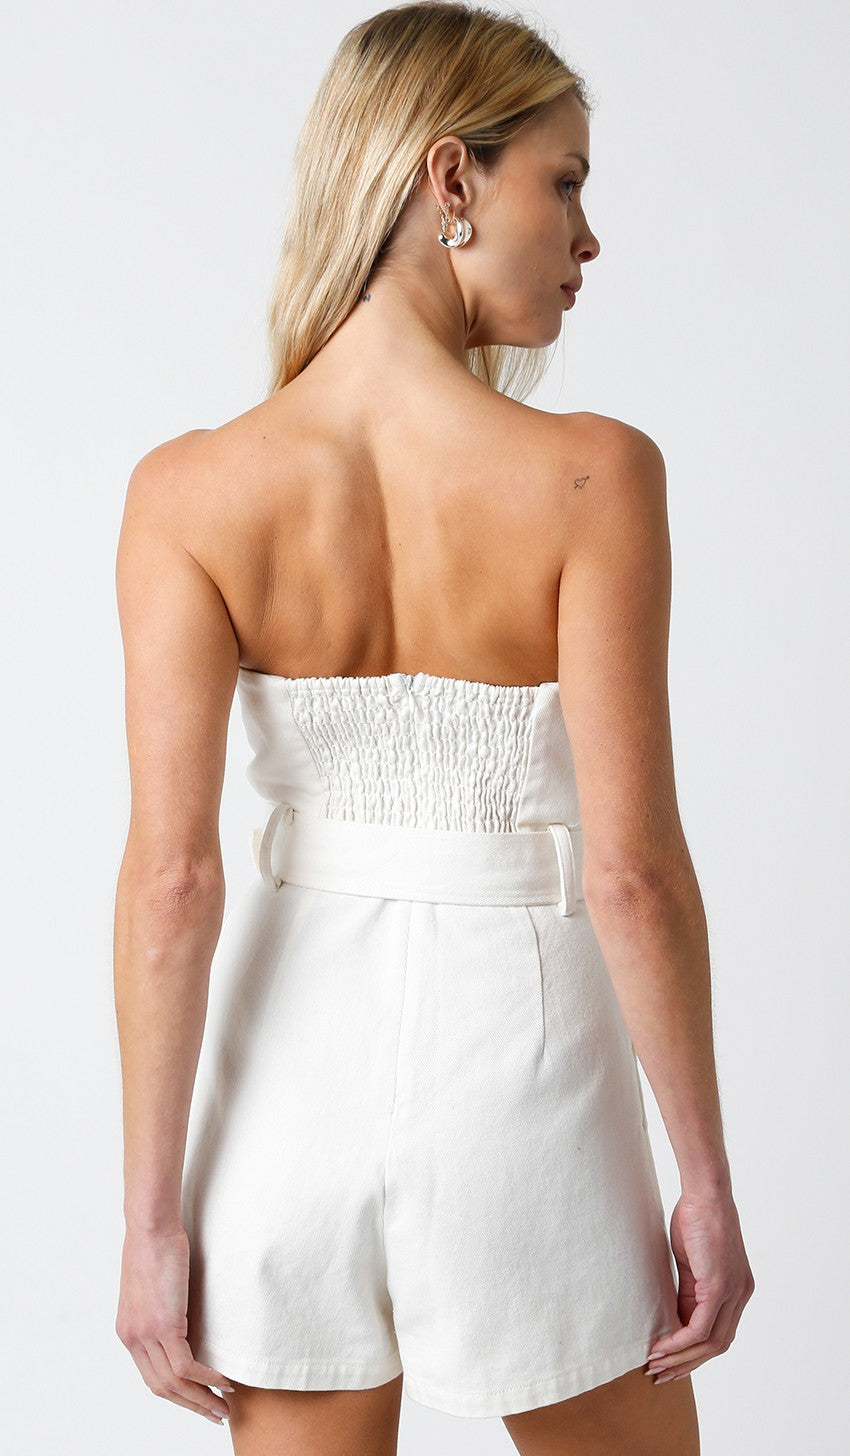 High Hopes Belted Romper White, Romper Dress by Olivaceous | LIT Boutique